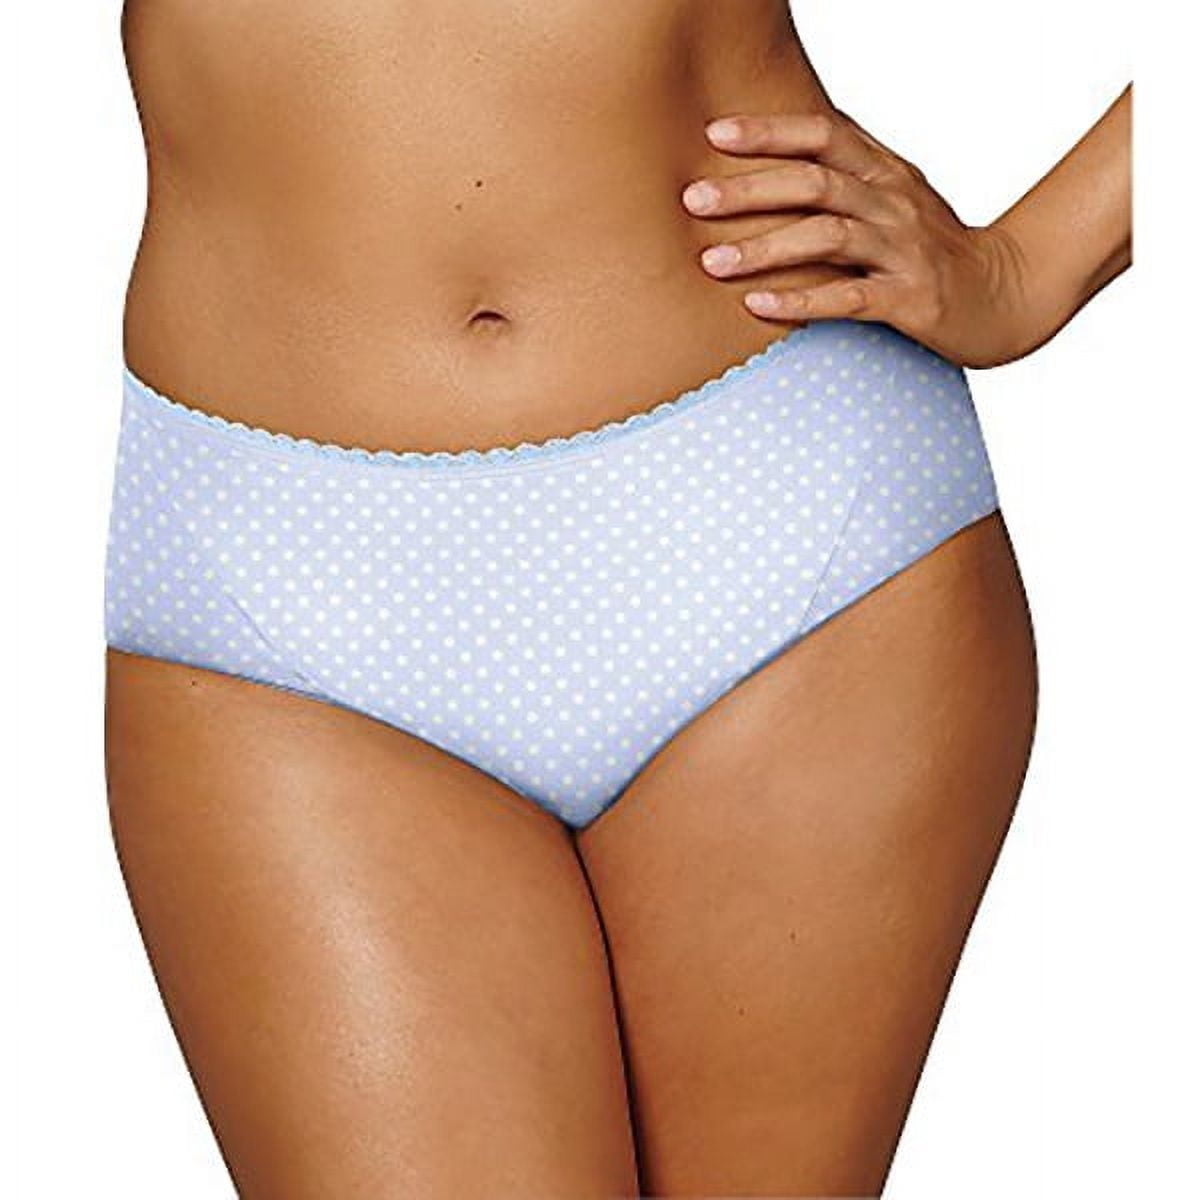 Playtex Womens Love My Curves Smooth Cheeky Hipster Style-PSCHHL